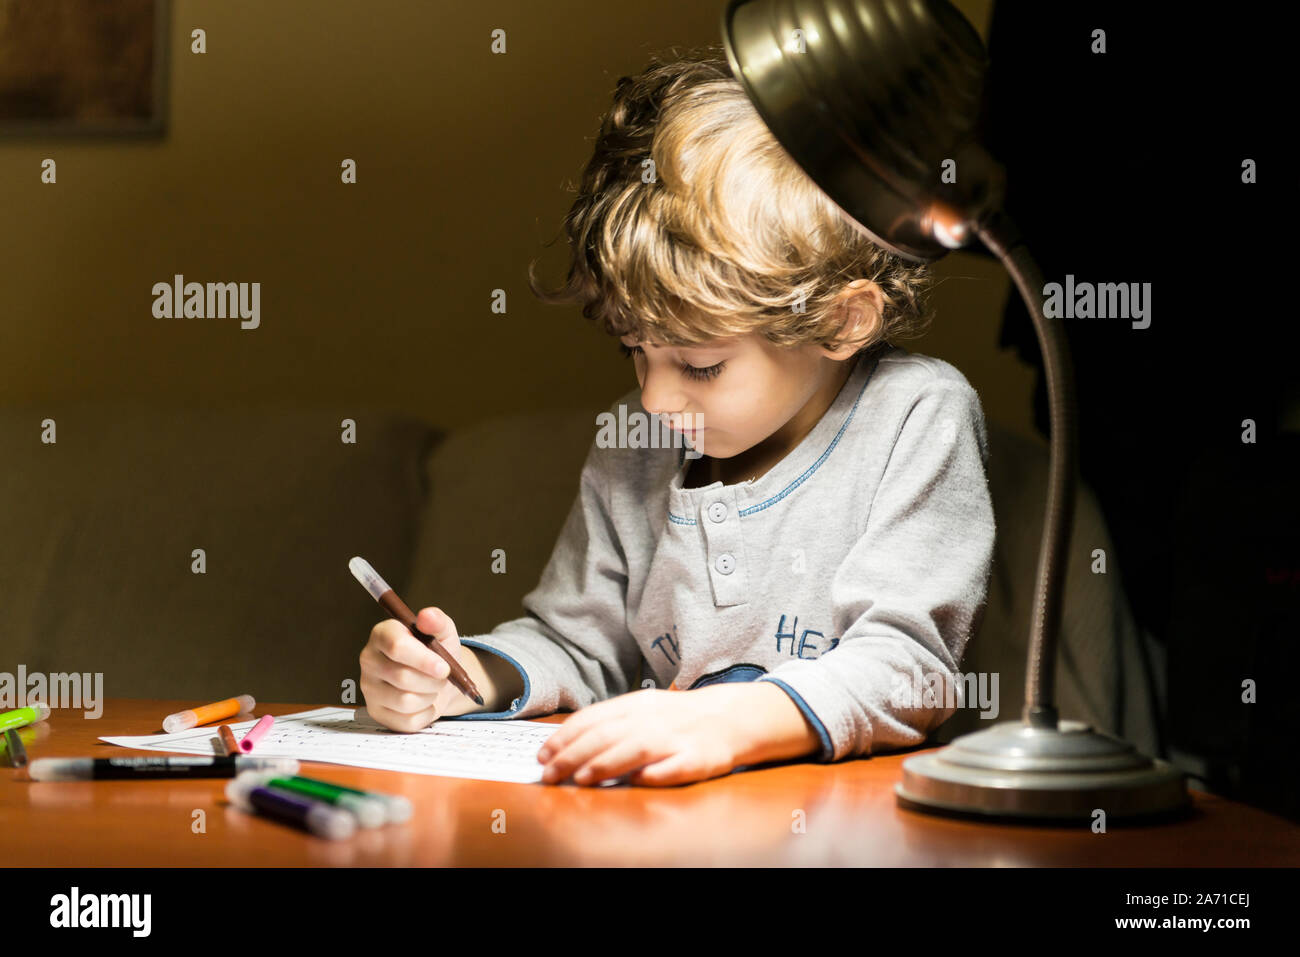 Child drawing with markers, illuminated by the light of a lamp. Stock Photo